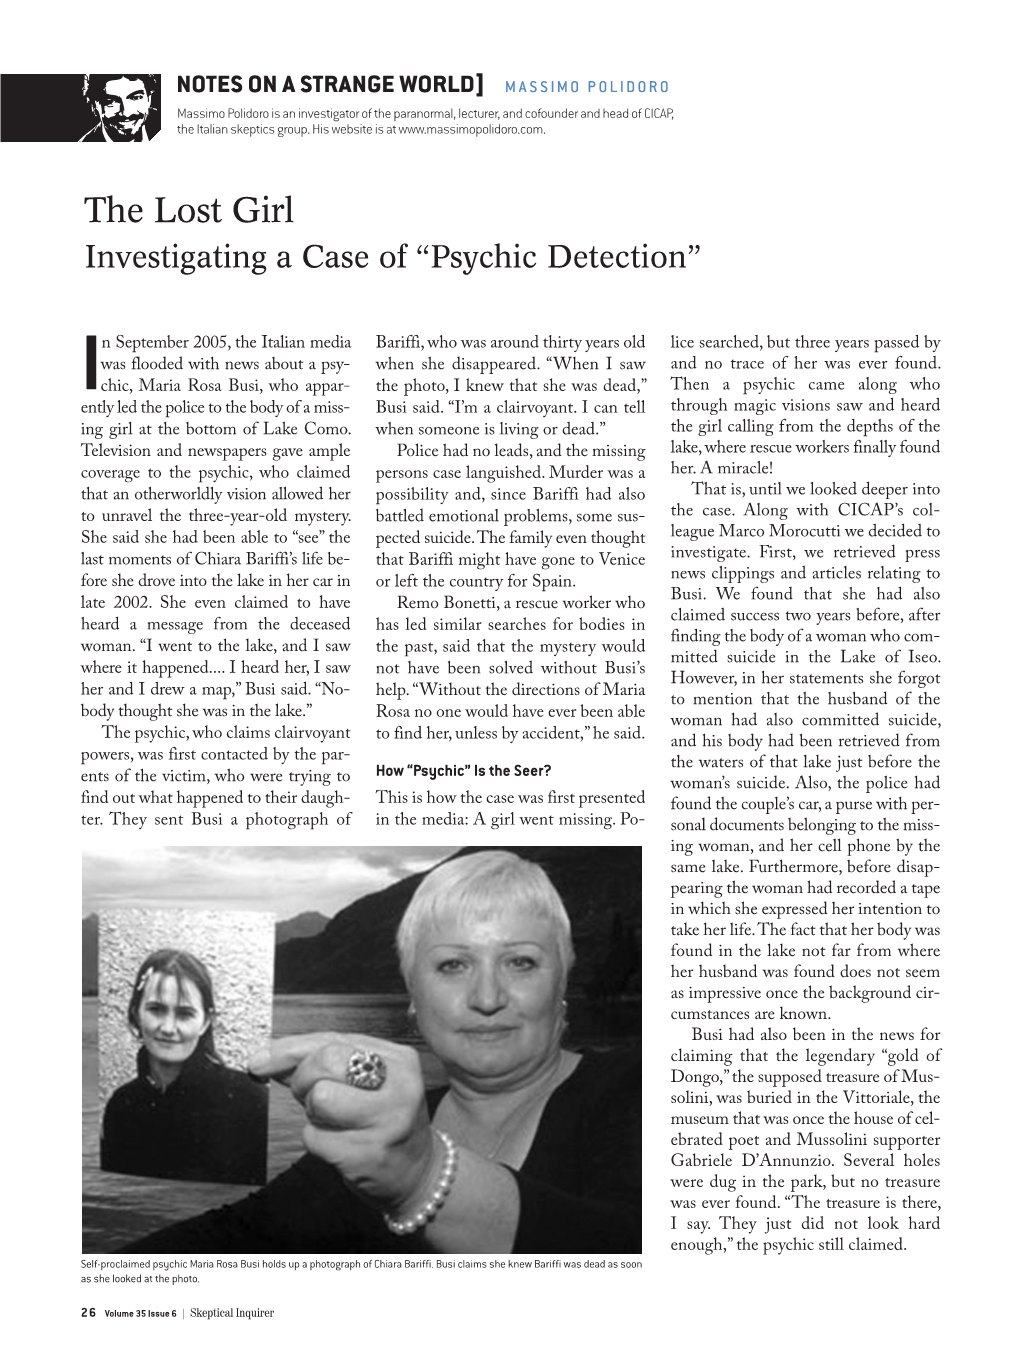 The Lost Girl Investigating a Case of “Psychic Detection”